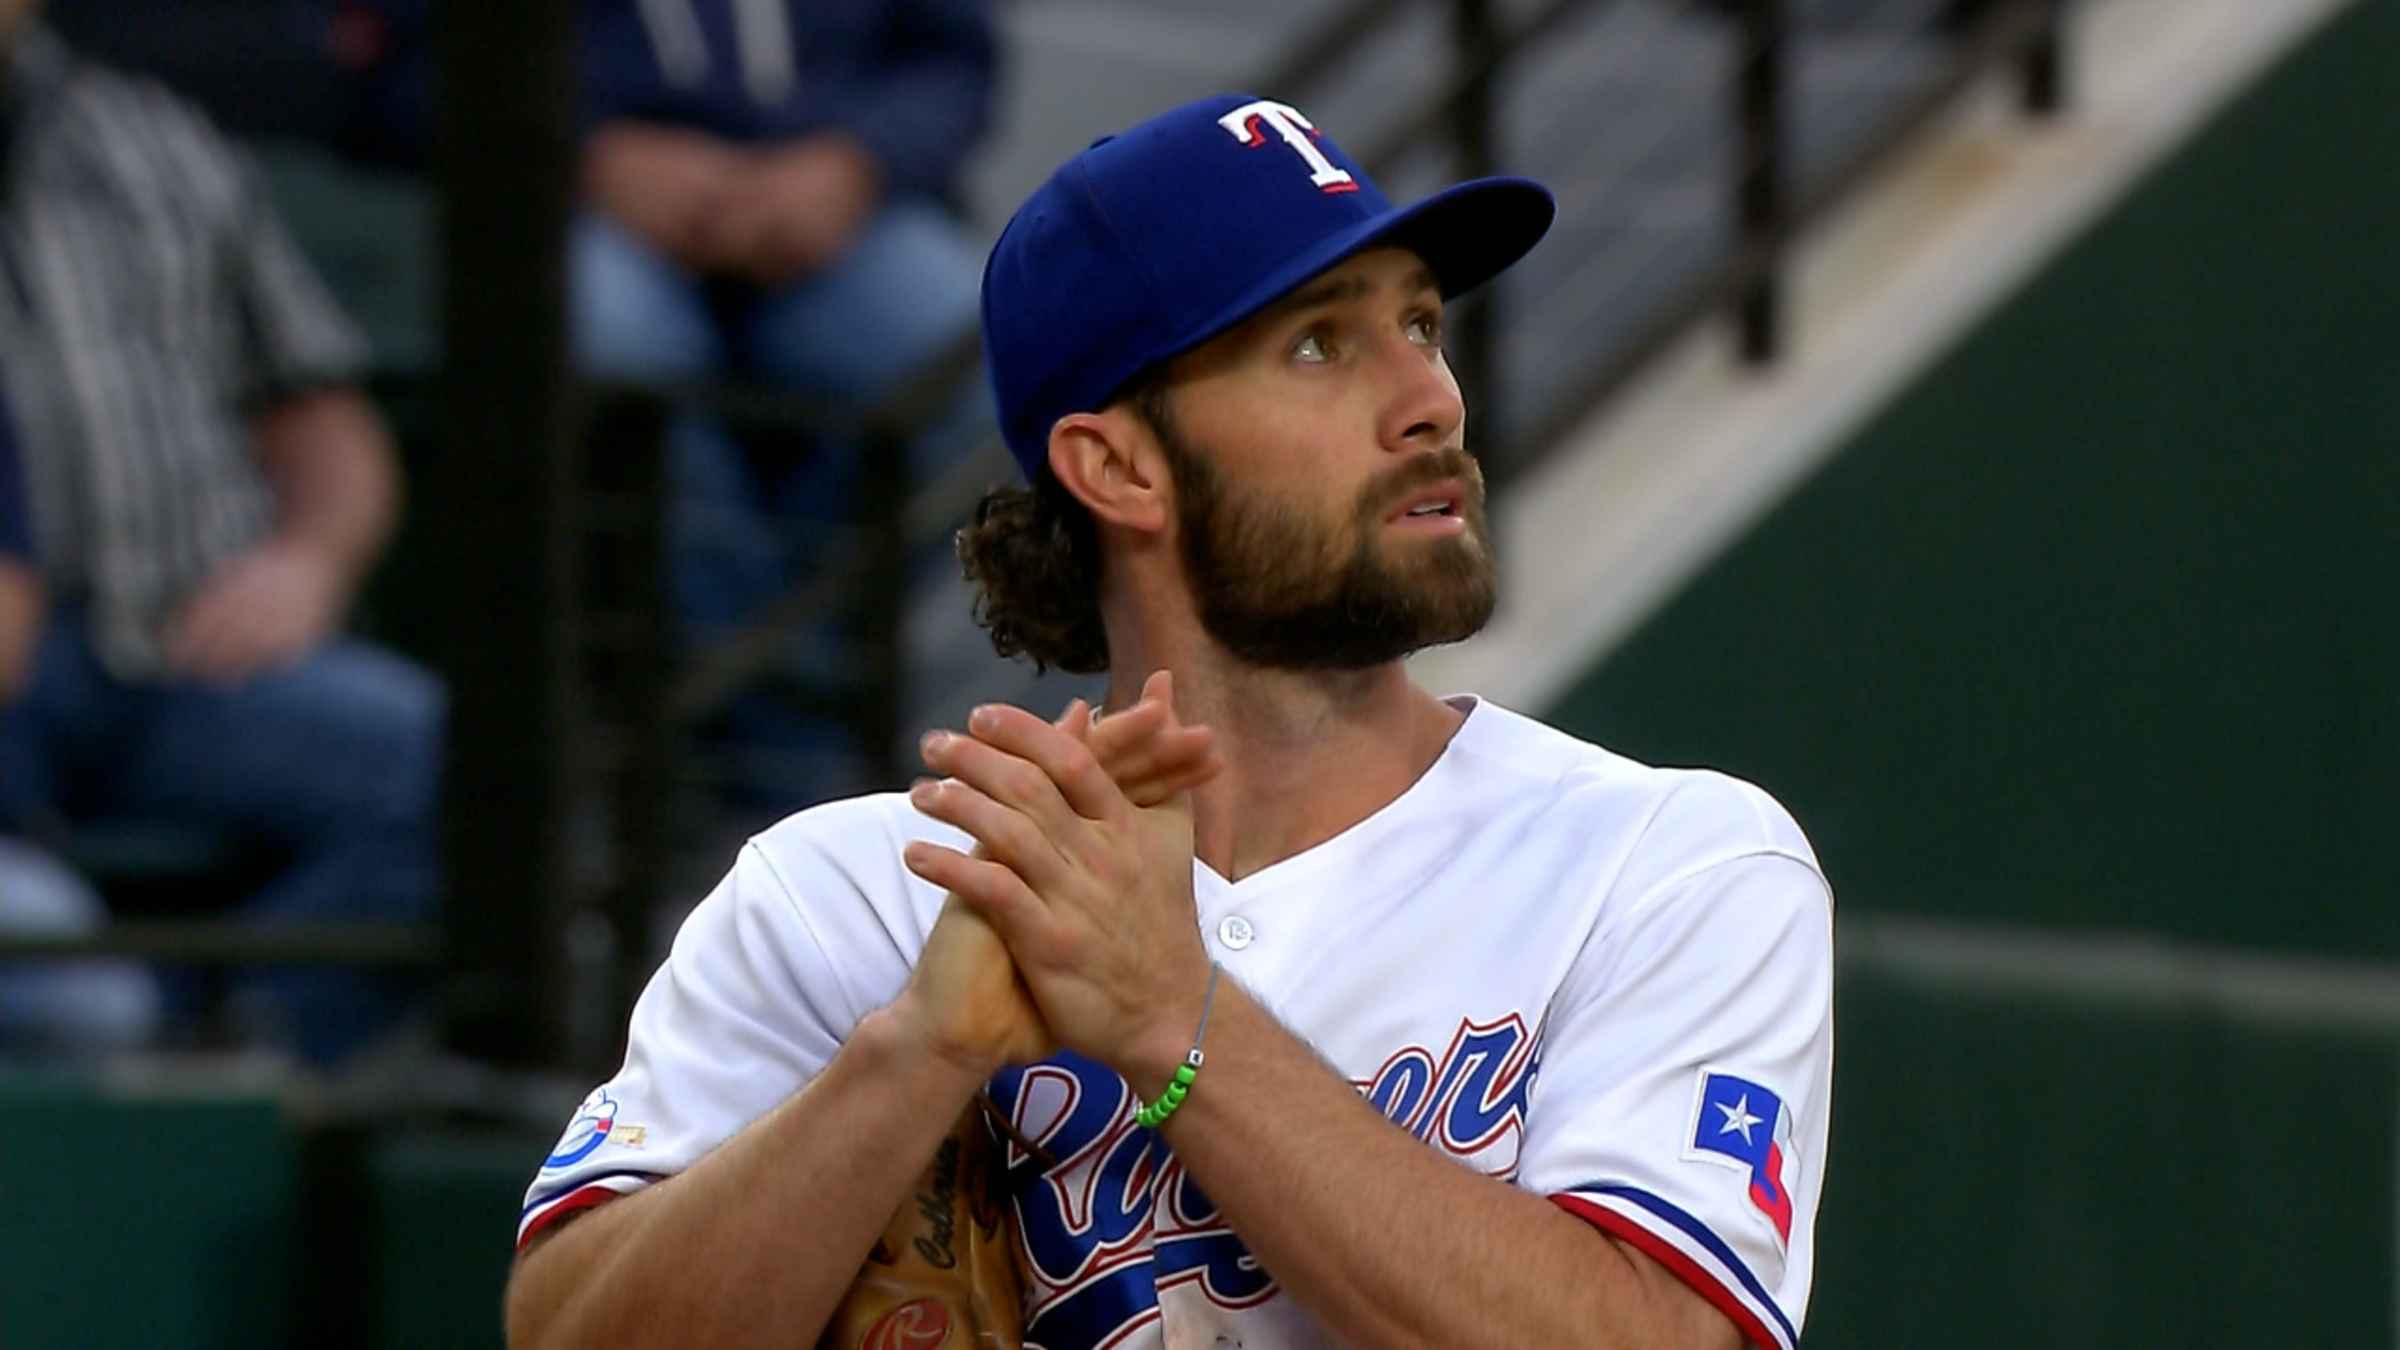 2022 in review: Charlie Culberson - Lone Star Ball